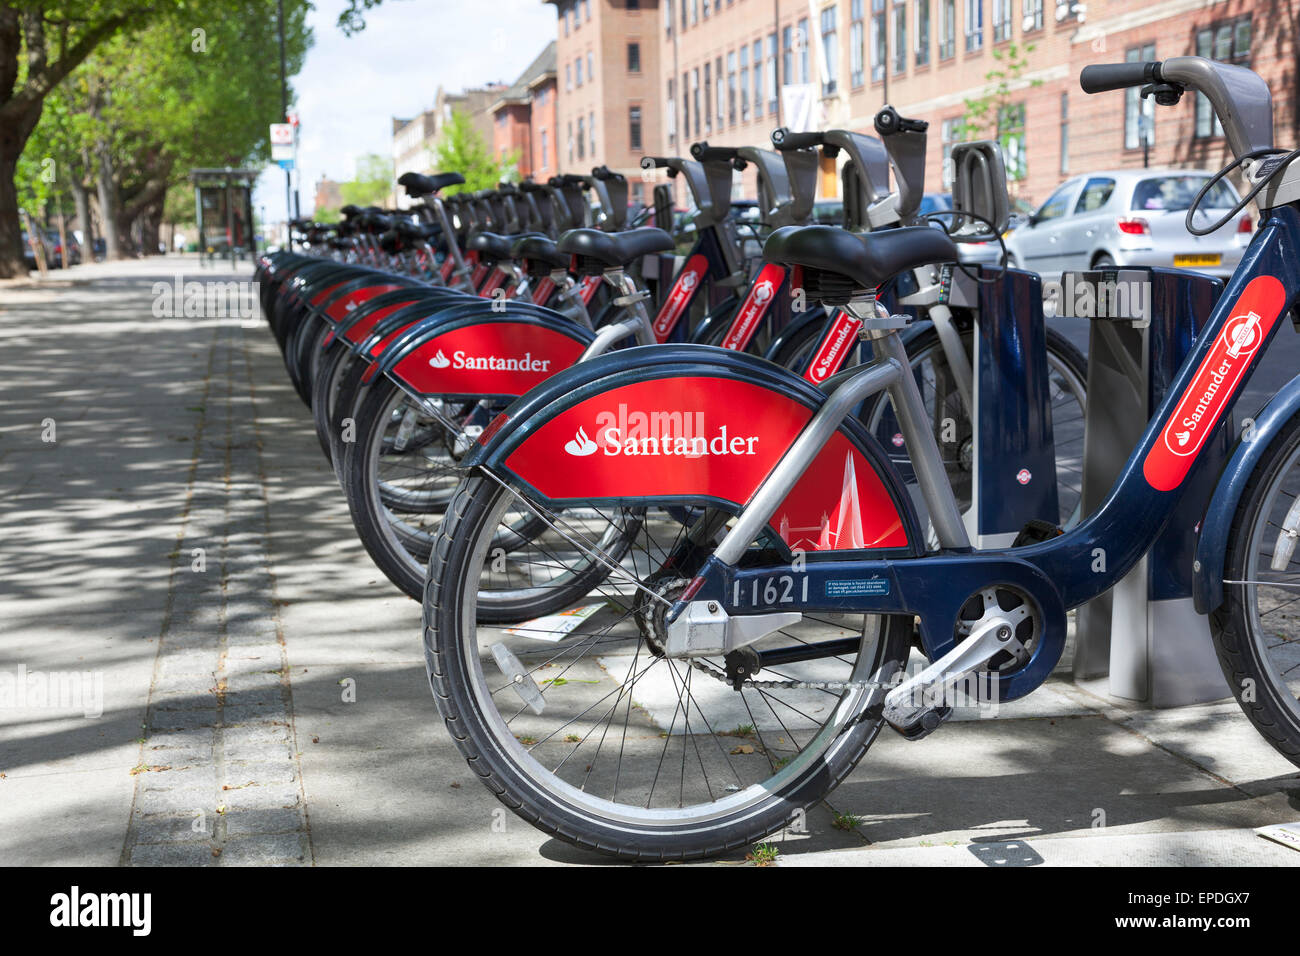 May 2015 - Barclay's logos are replaced by Santander in the London bicycle hire scheme Stock Photo